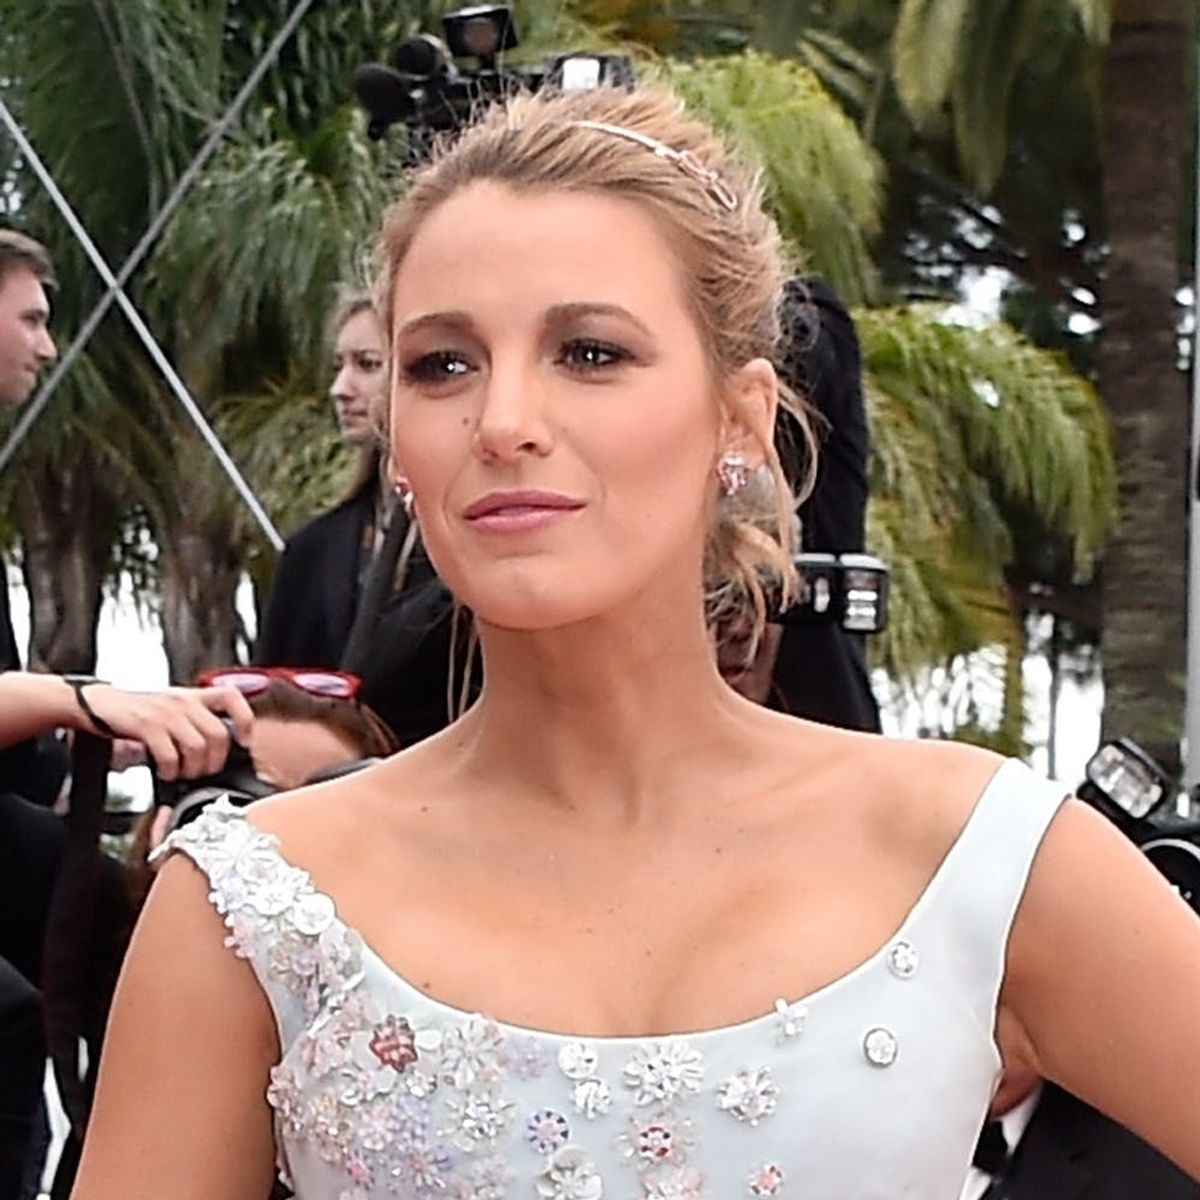 Blake Lively Showed Up at Cannes Looking Like Straight-Up Cinderella